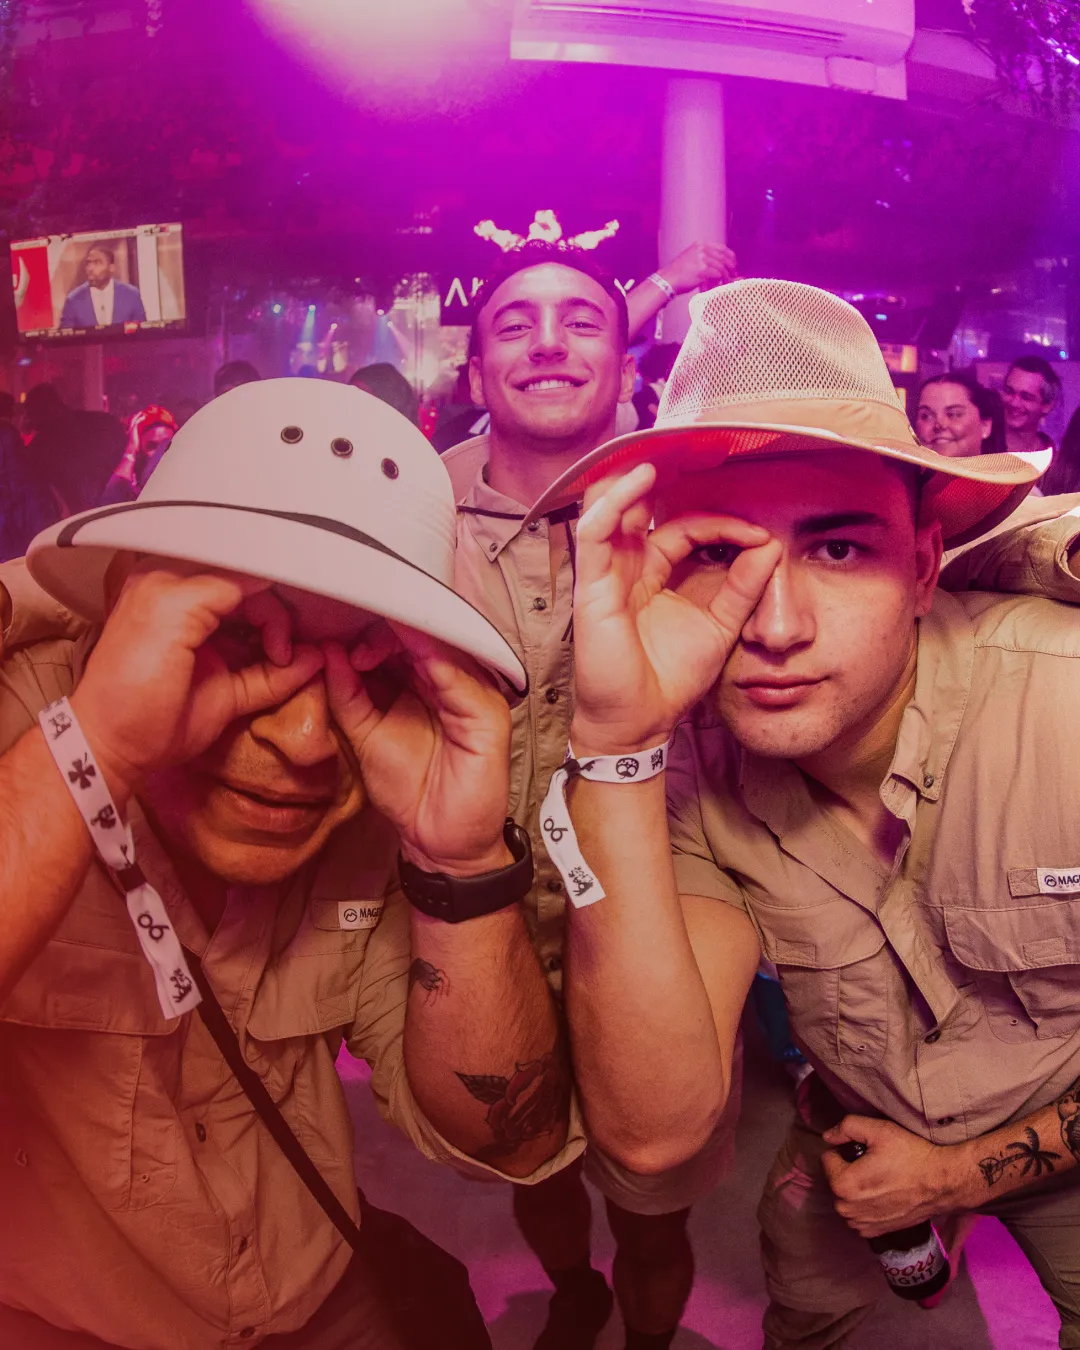 Amidst the Halloween energy, a group of young gentleman dressed and ready for a safari pose for the camera making binoculars with their hands and enjoy the fun of the halloween bar crawl
